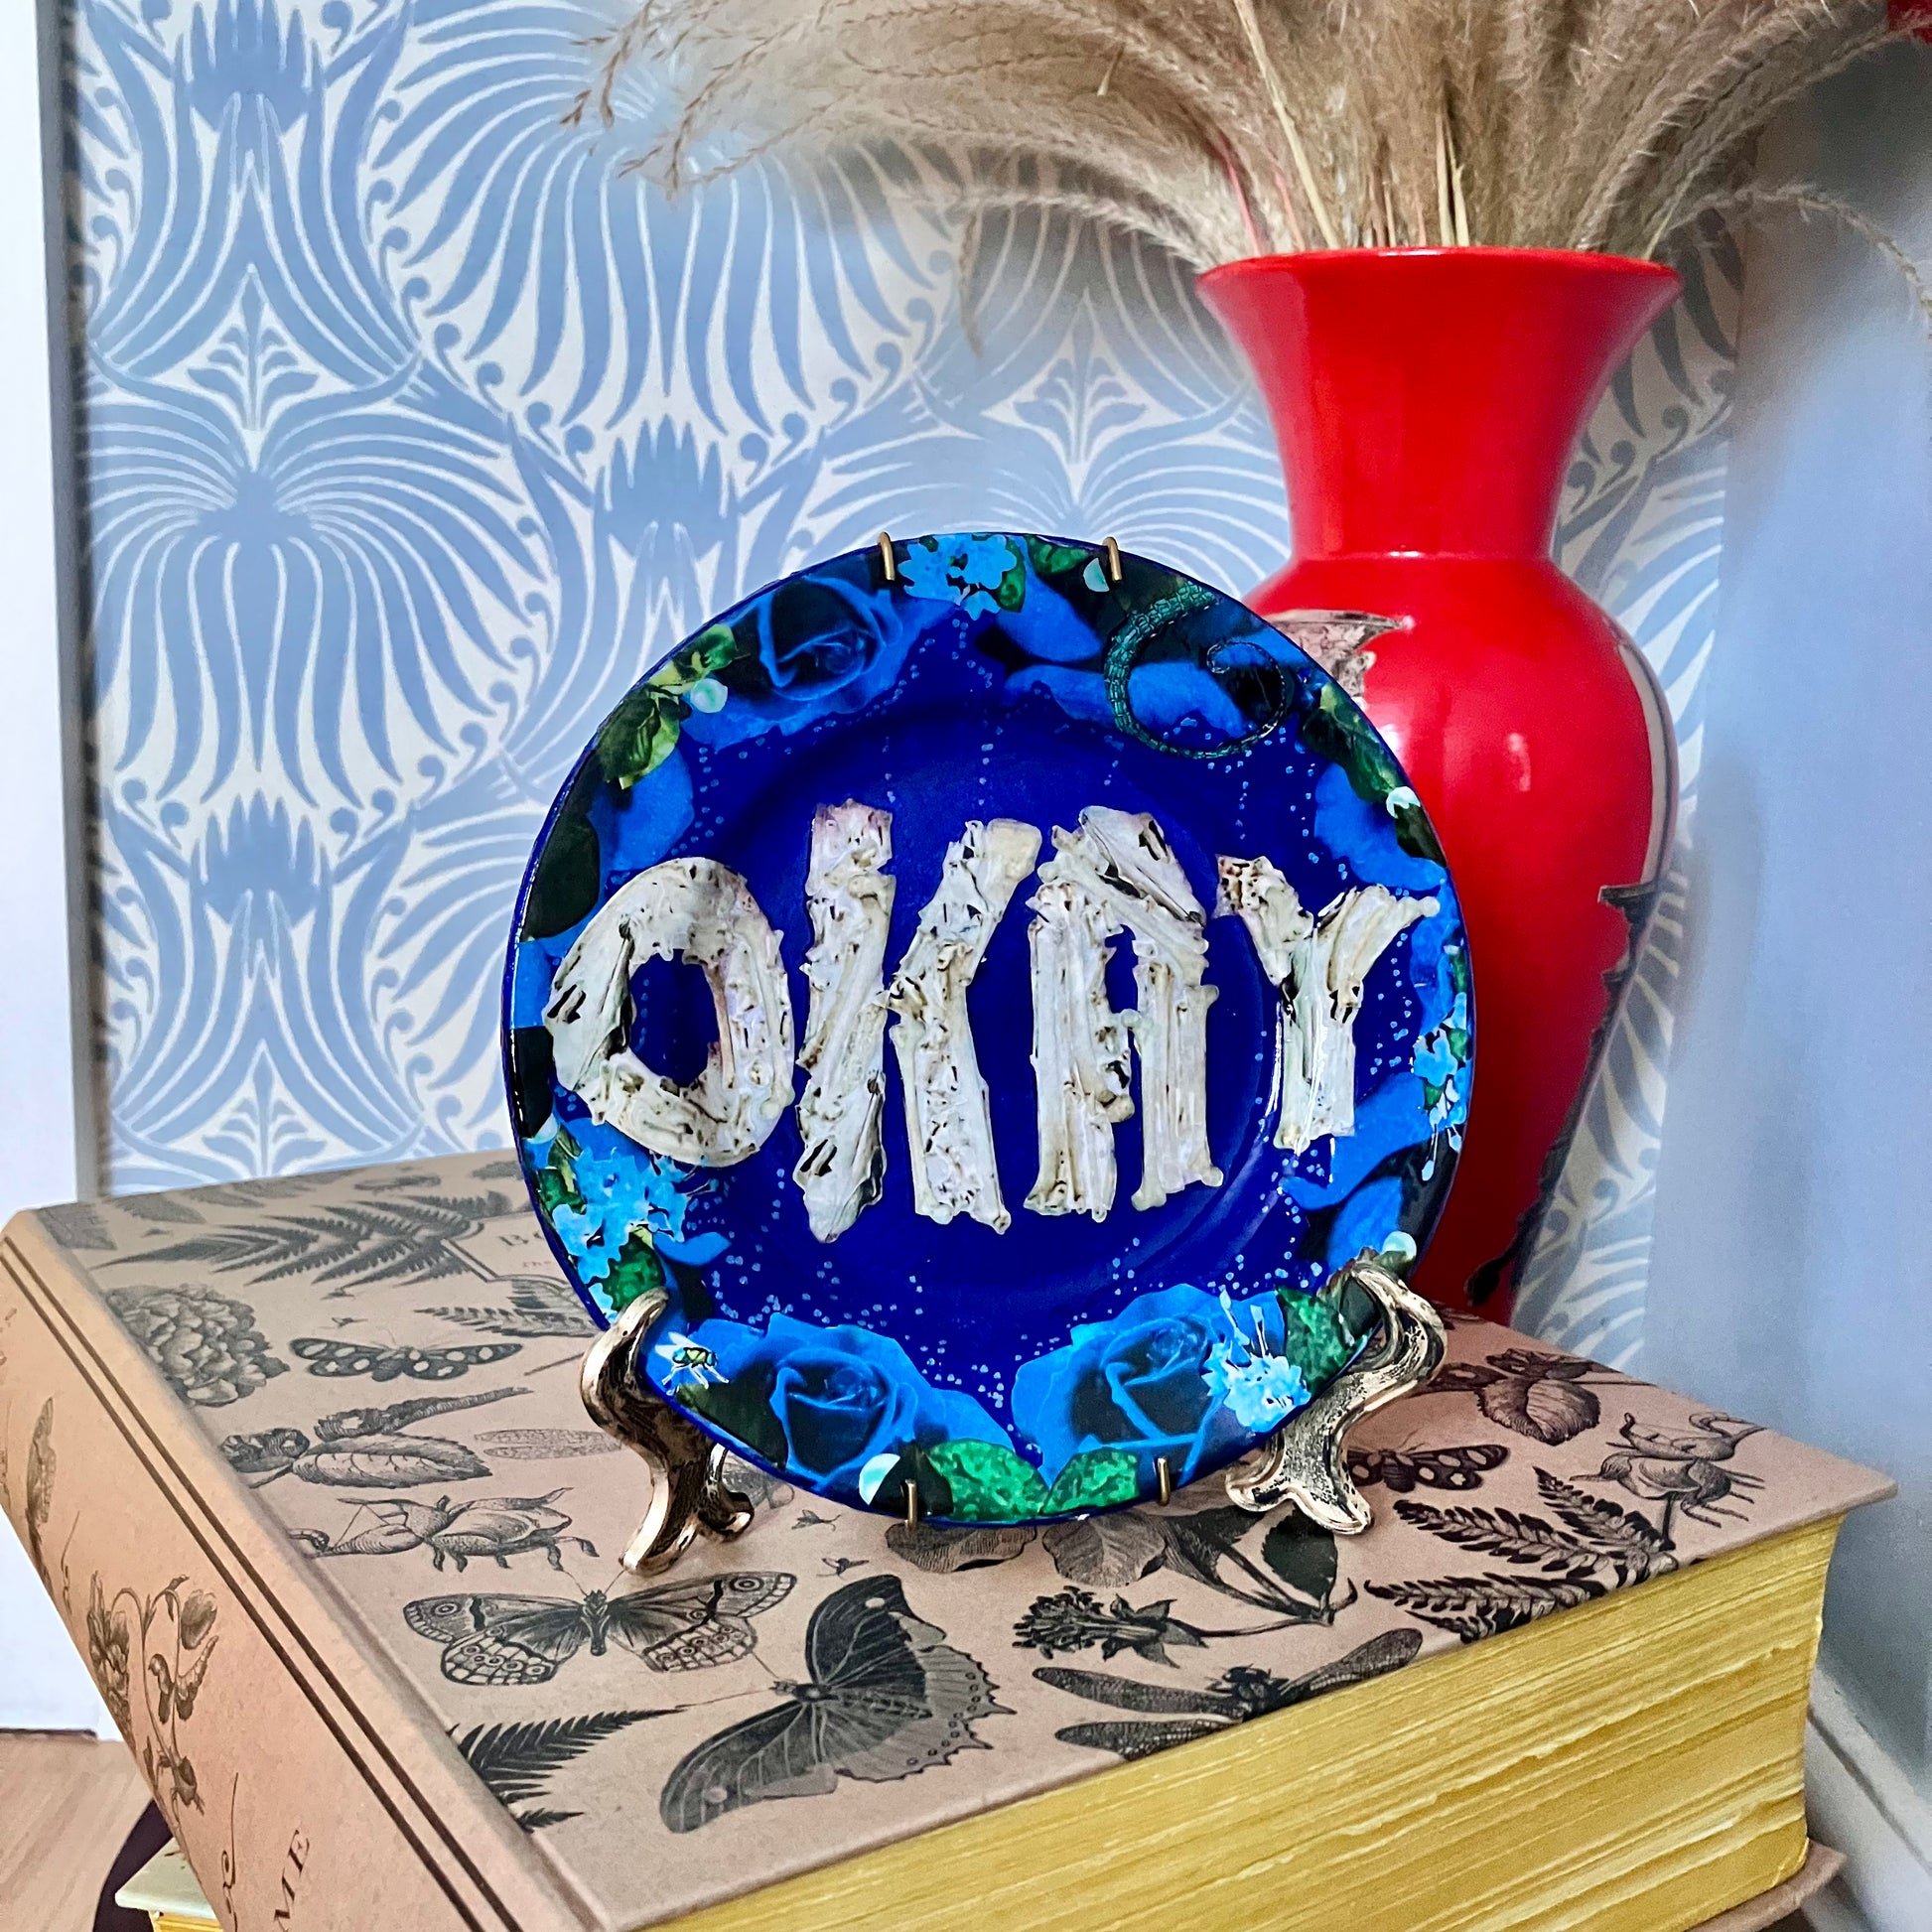 House of Frisson's "Okay" Wall Plate one-of-a-kind collage artwork on up-cycled plate. Plate on a plate stand resting on a book.